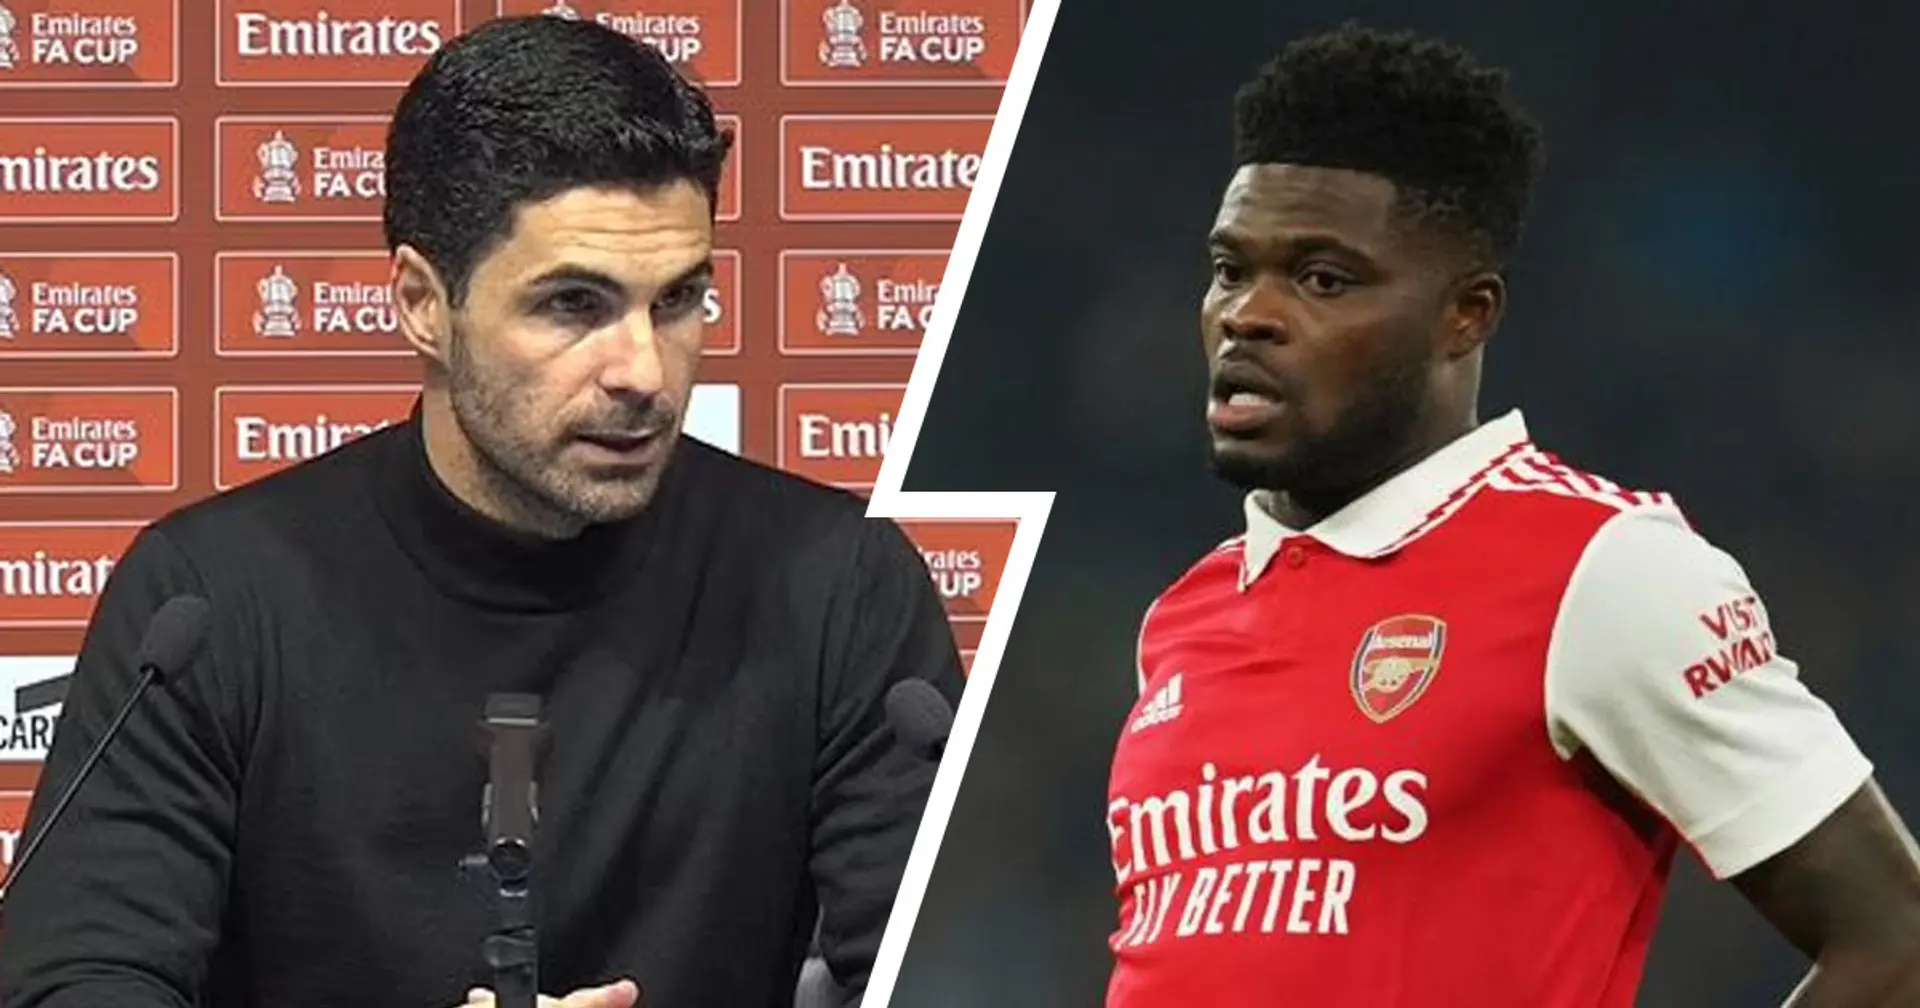 'It's getting worse and worse': Arteta gives worrying update on Partey after Man City loss